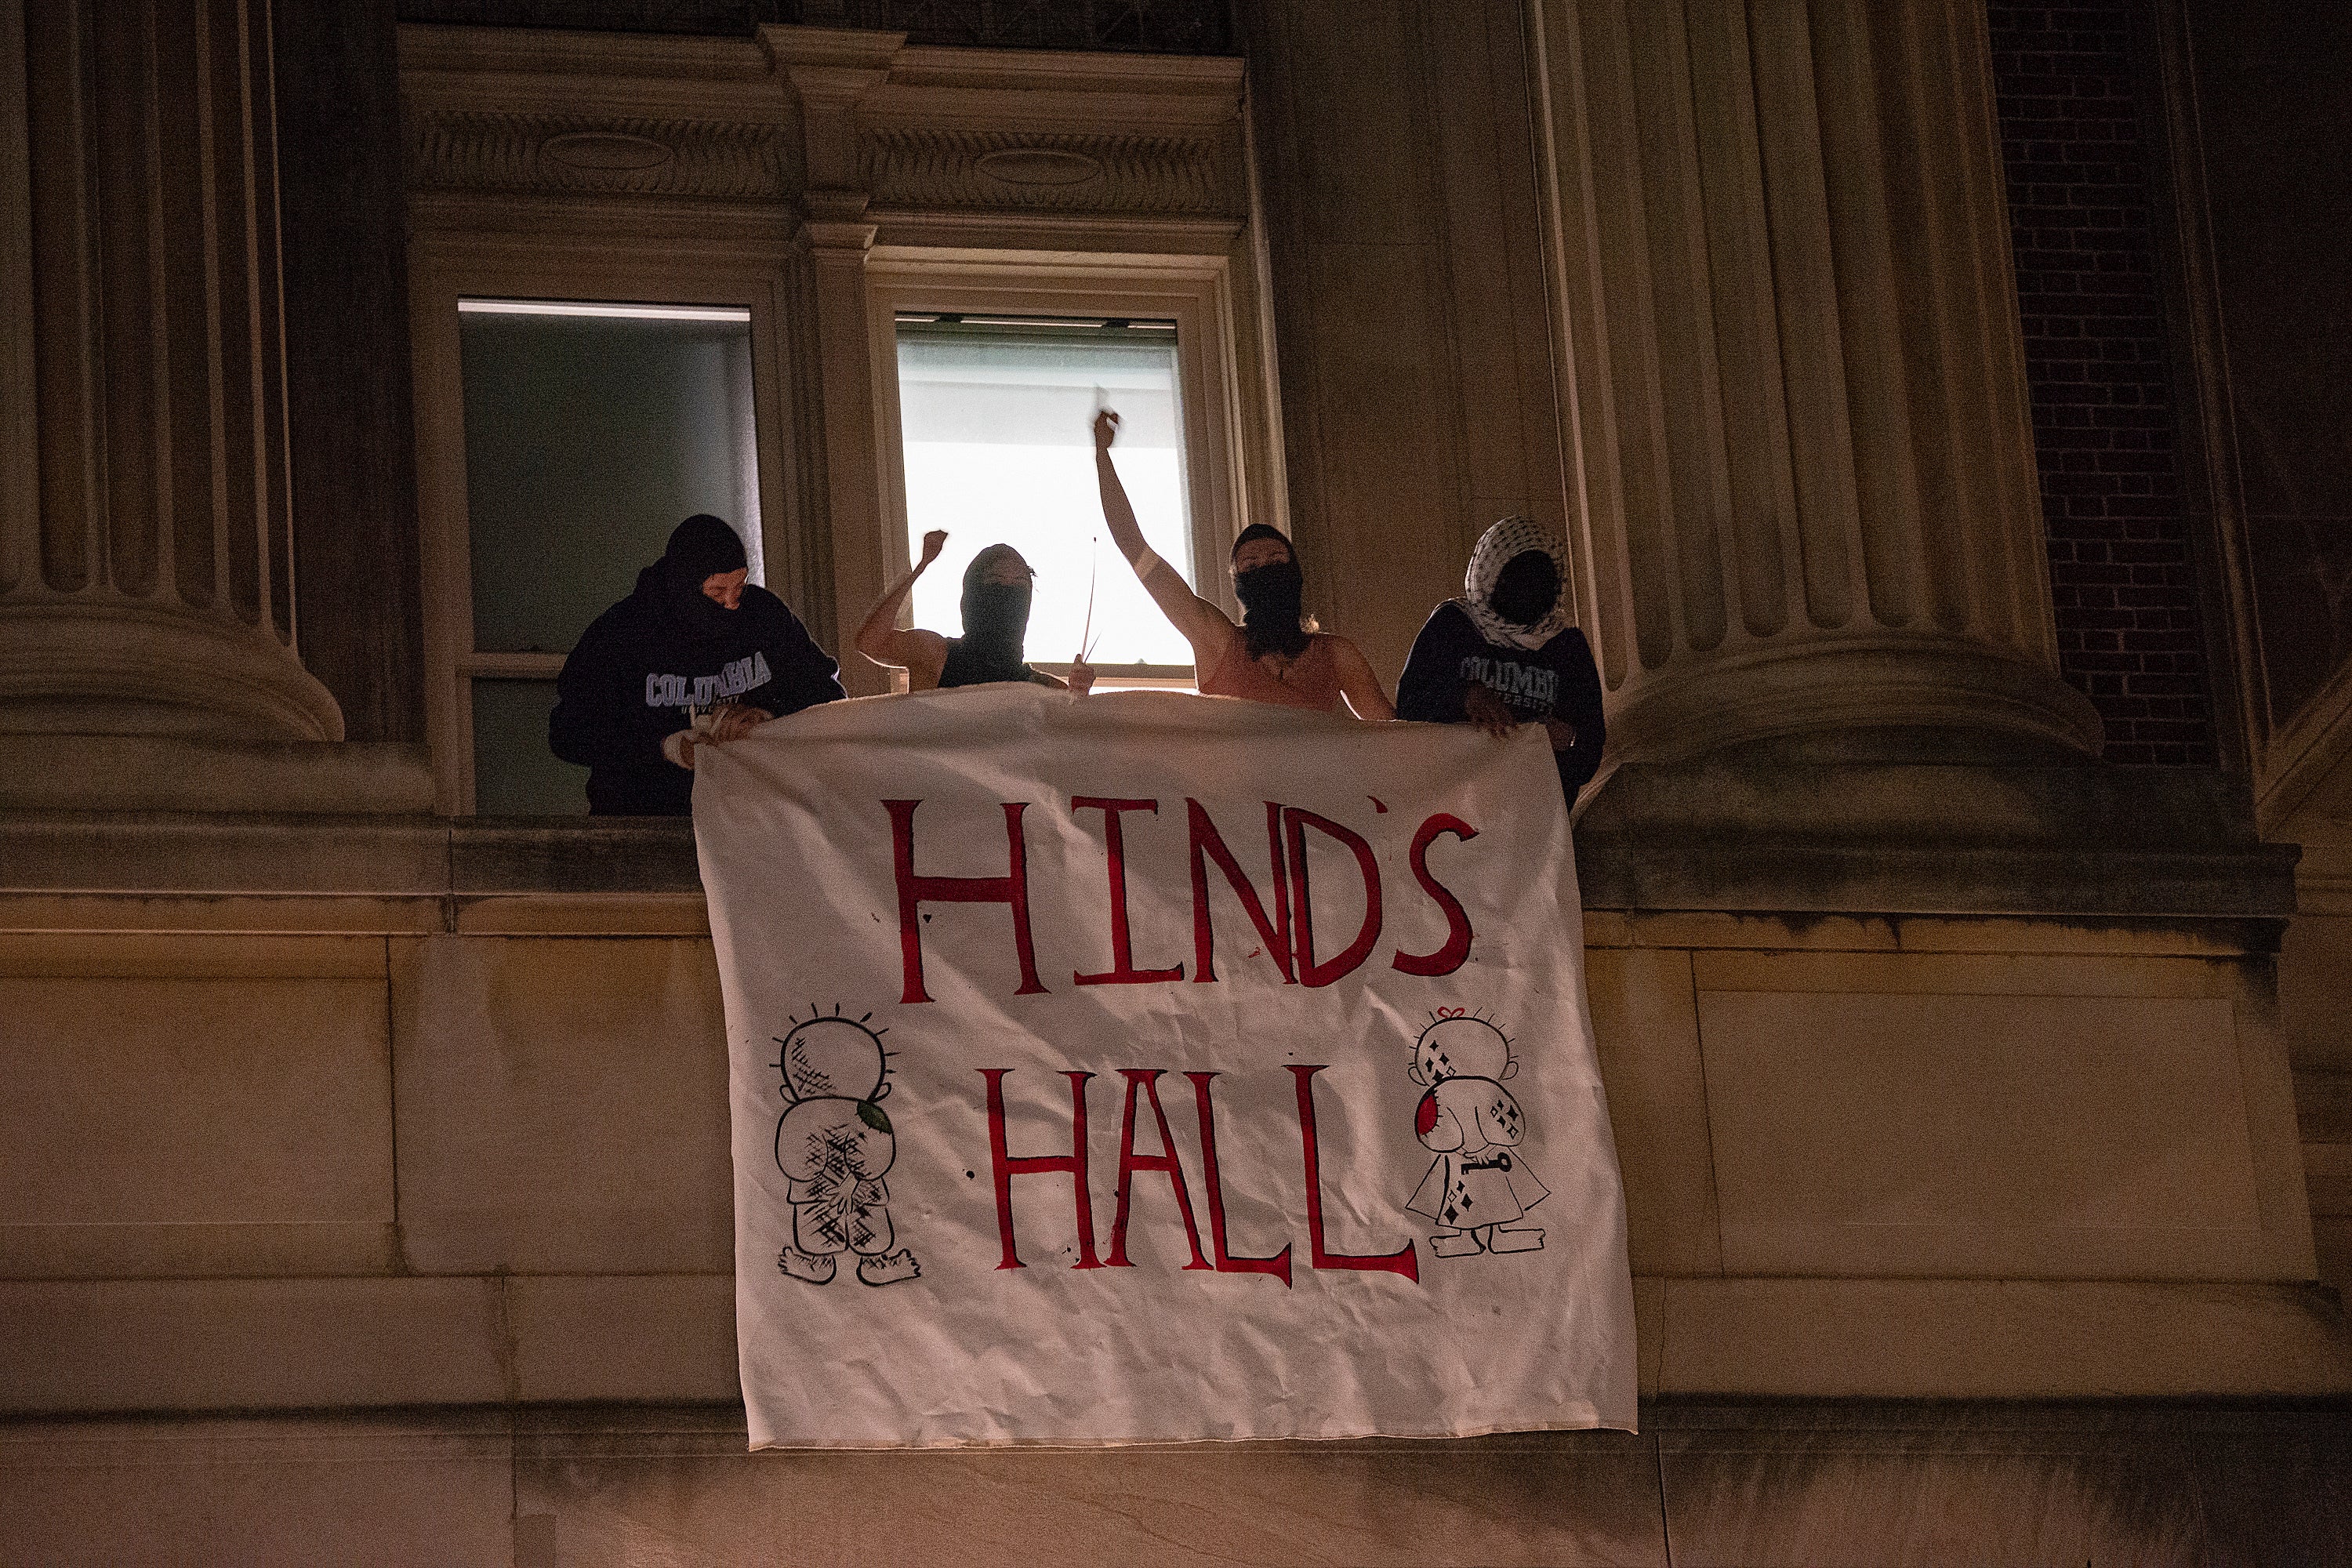 Gaza protesters hang a banner that reads ‘Hind’s Hall’ as they barricade themselves inside Columbia University’s Hamilton Hall